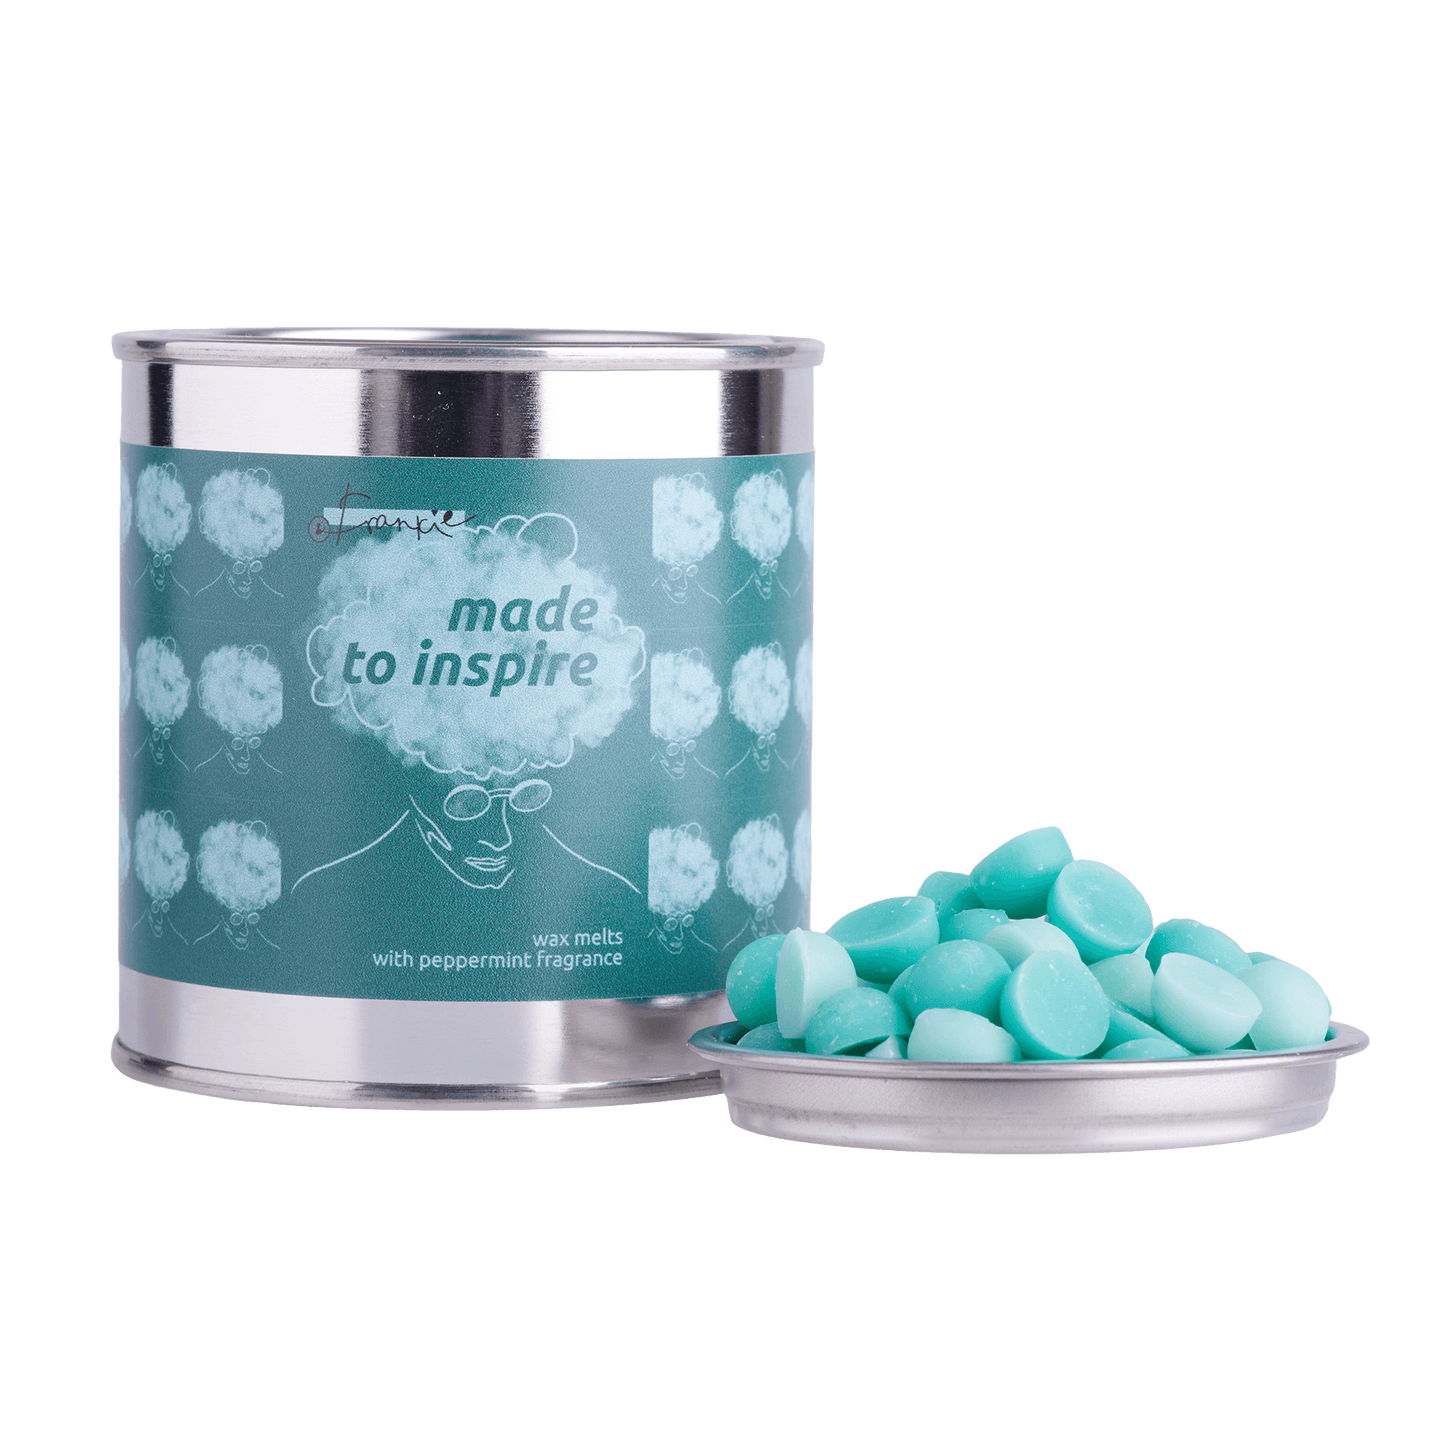 "Made to inspire" soy wax melts